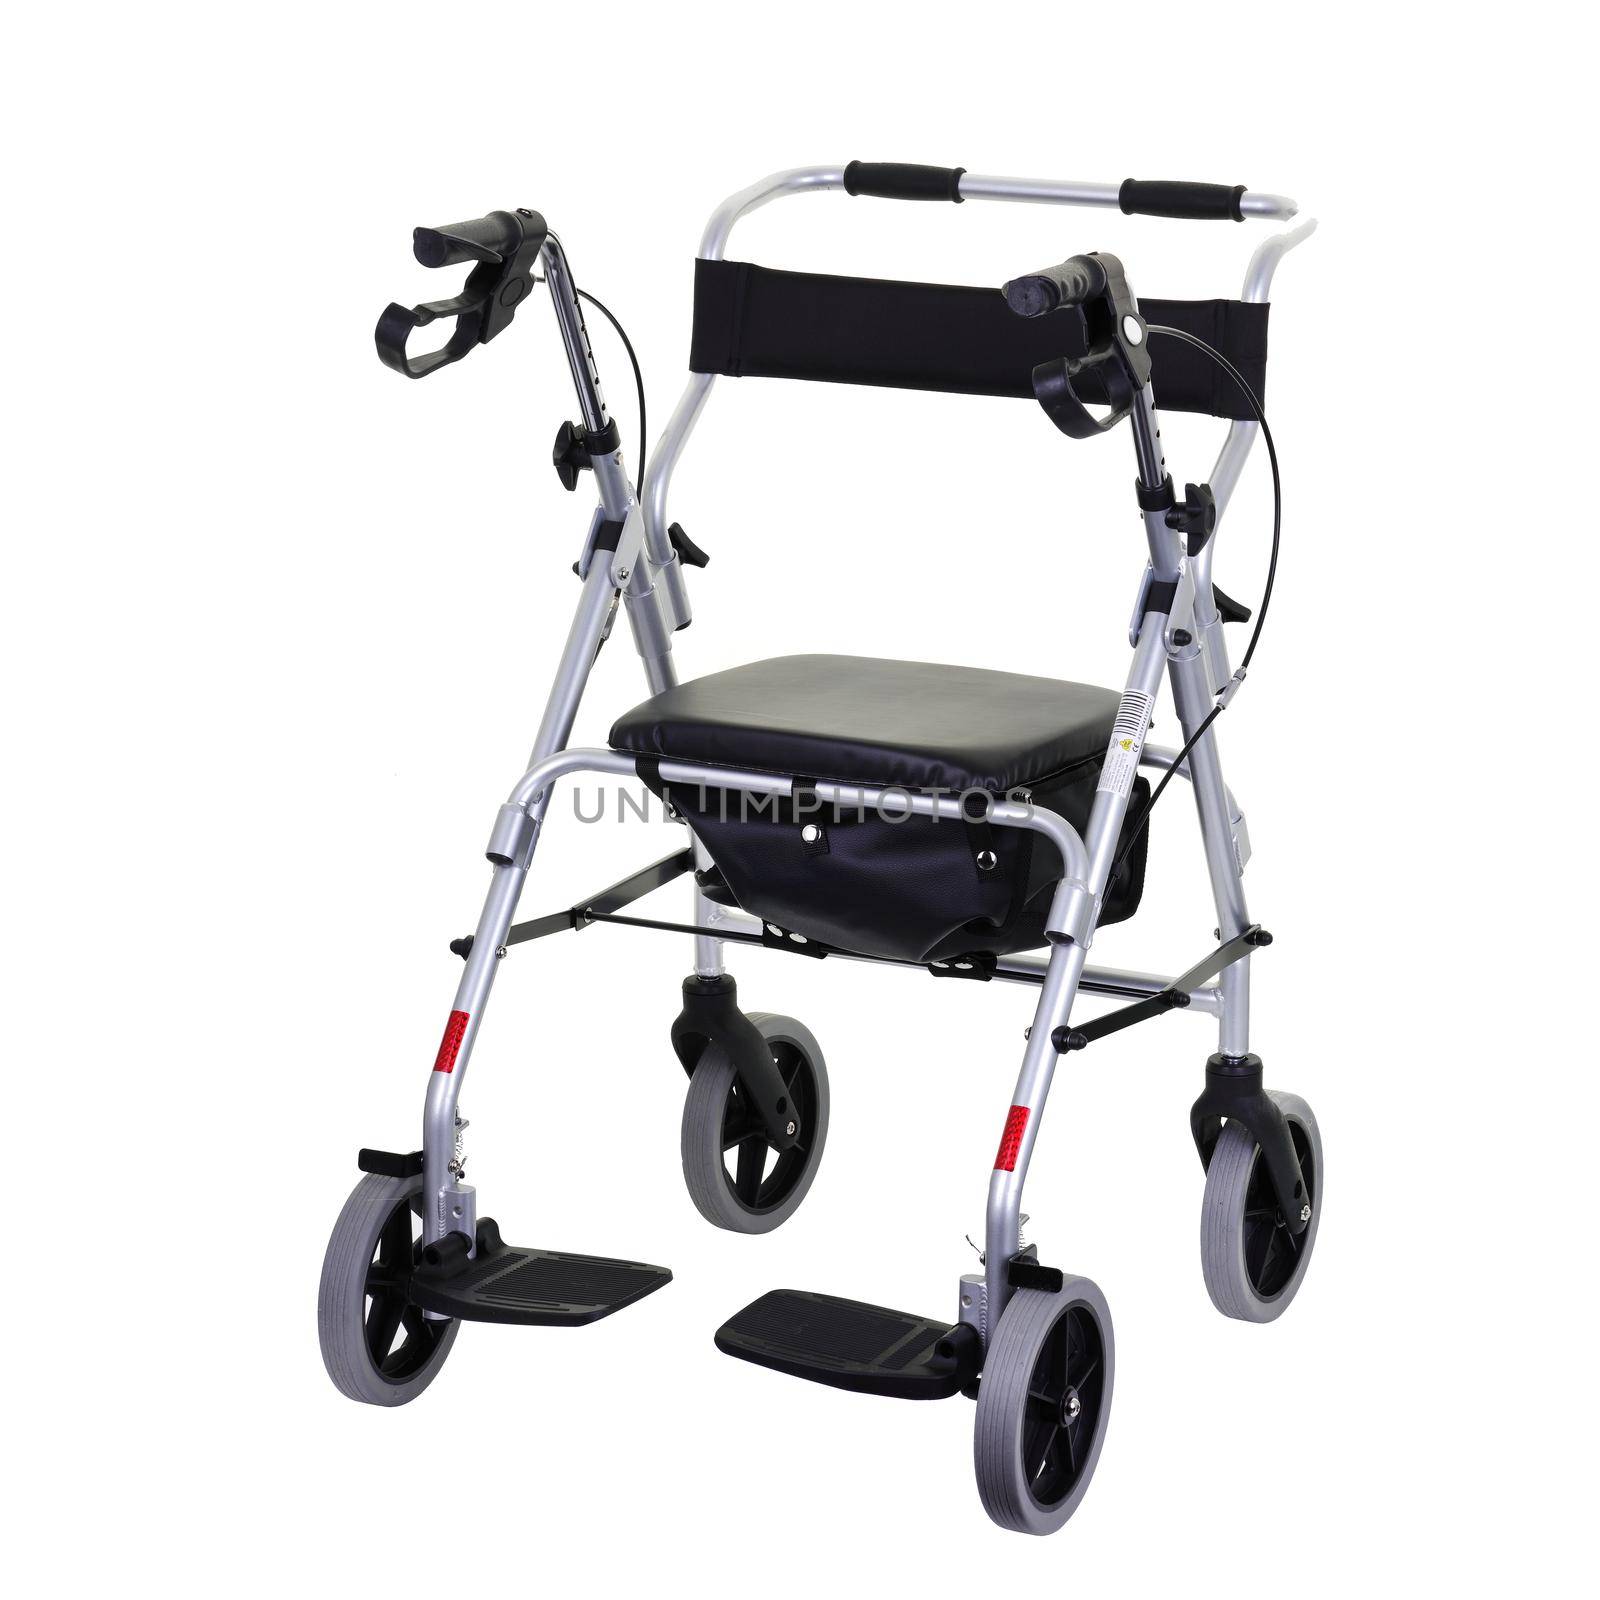 A combined walker and transit chair for elderly and disabled